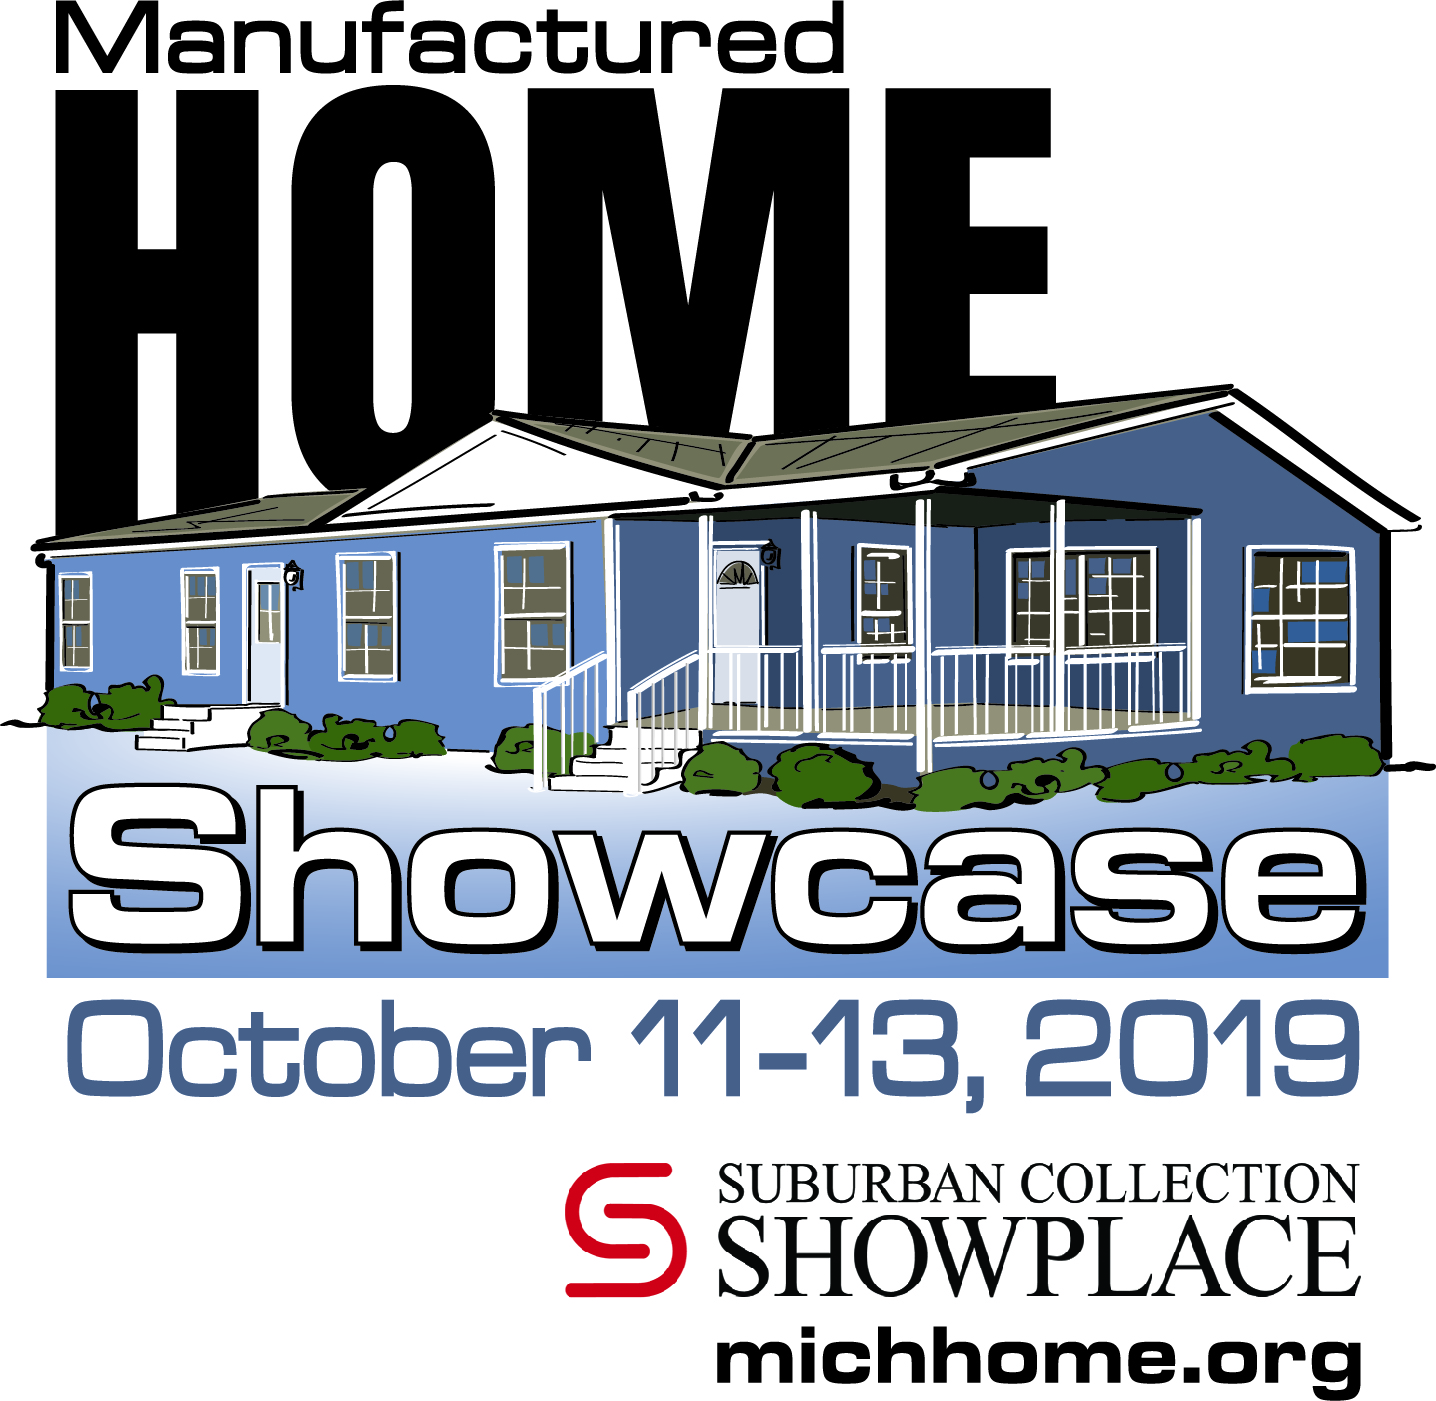 Michigan Manufactured Housing Association, Tuesday, October 1, 2019, Press release picture